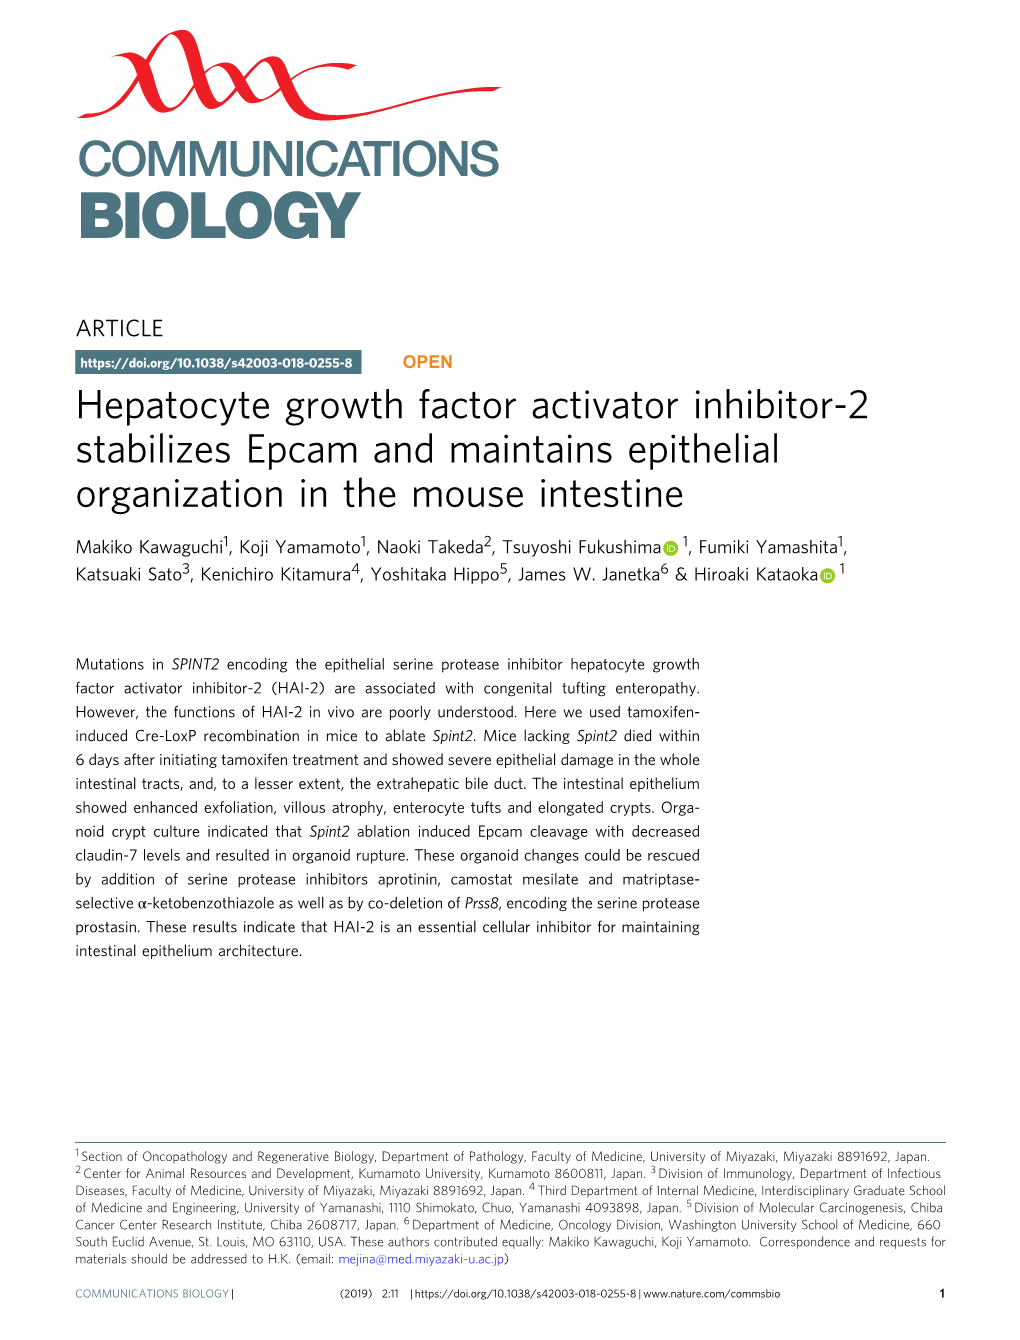 Hepatocyte Growth Factor Activator Inhibitor-2 Stabilizes Epcam and Maintains Epithelial Organization in the Mouse Intestine